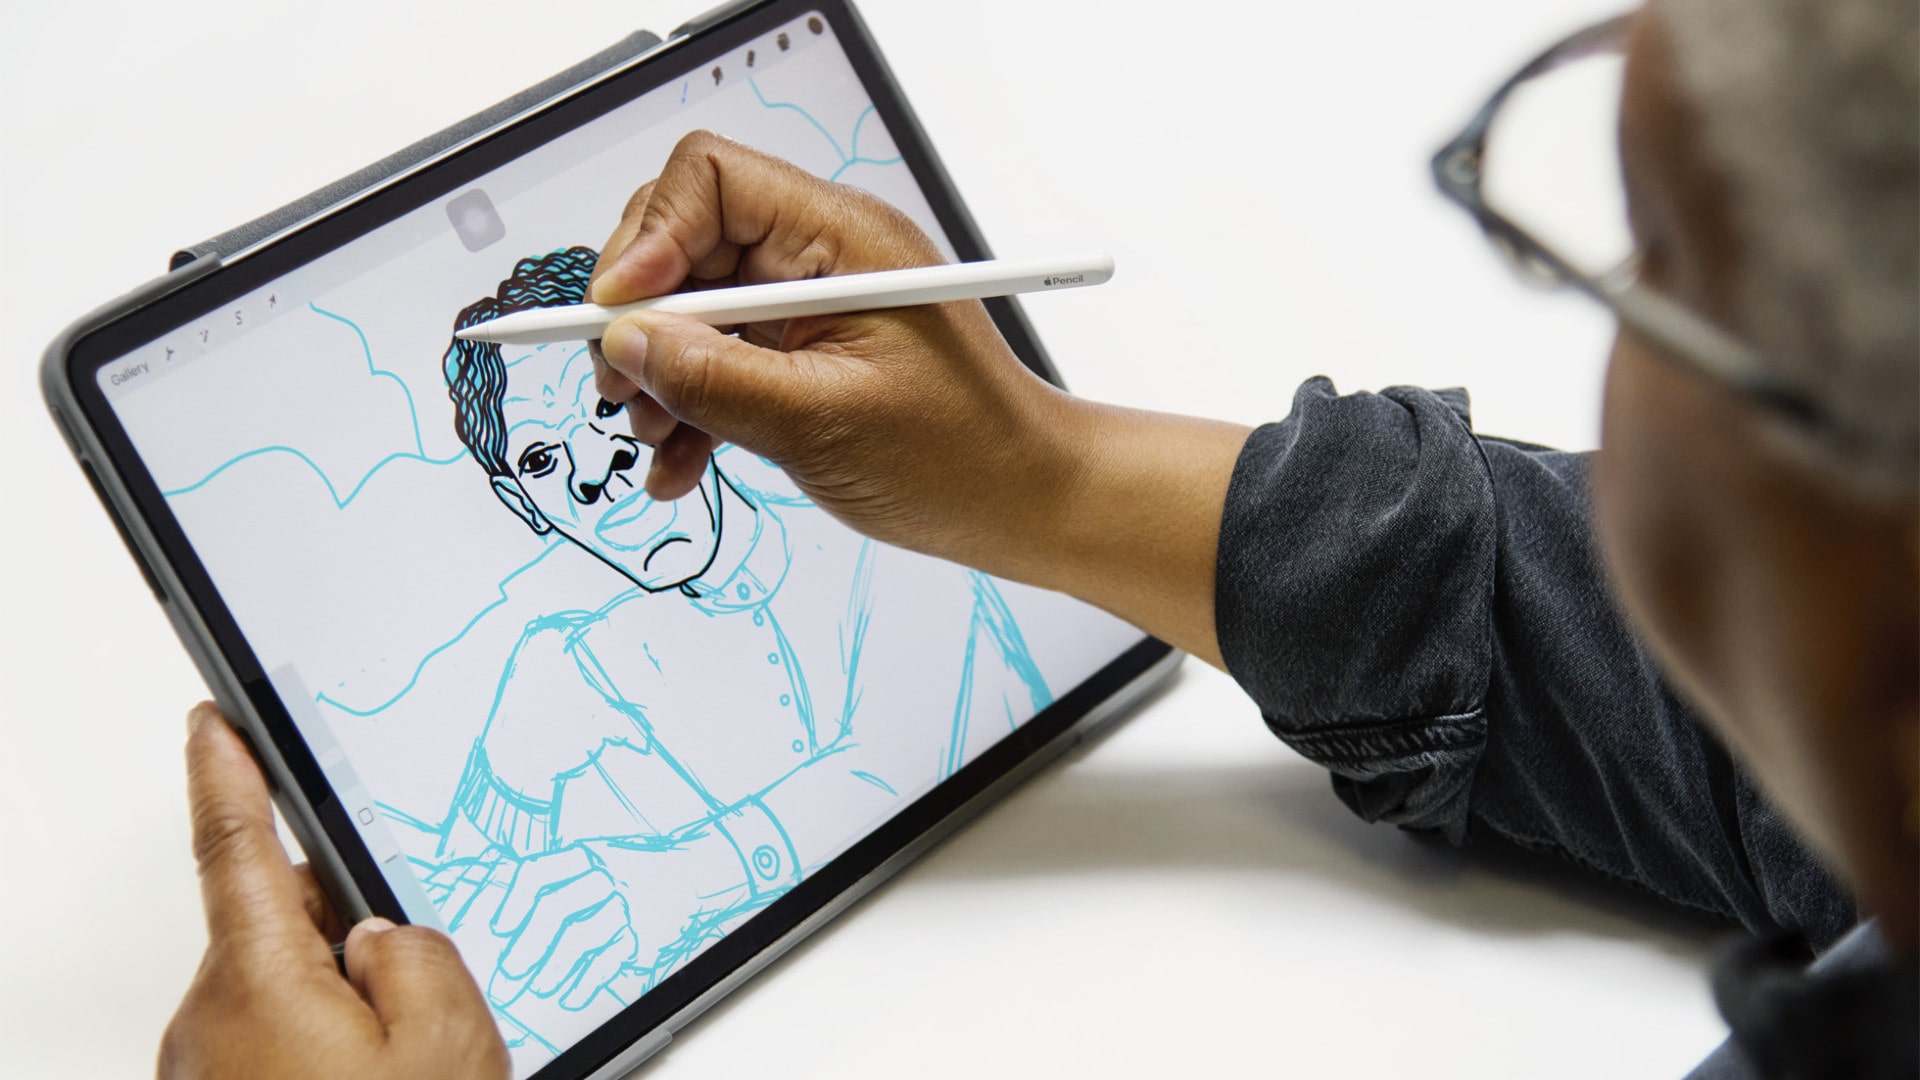 The rumored Apple Pencil 3 could make it easier than ever to draw on iPads